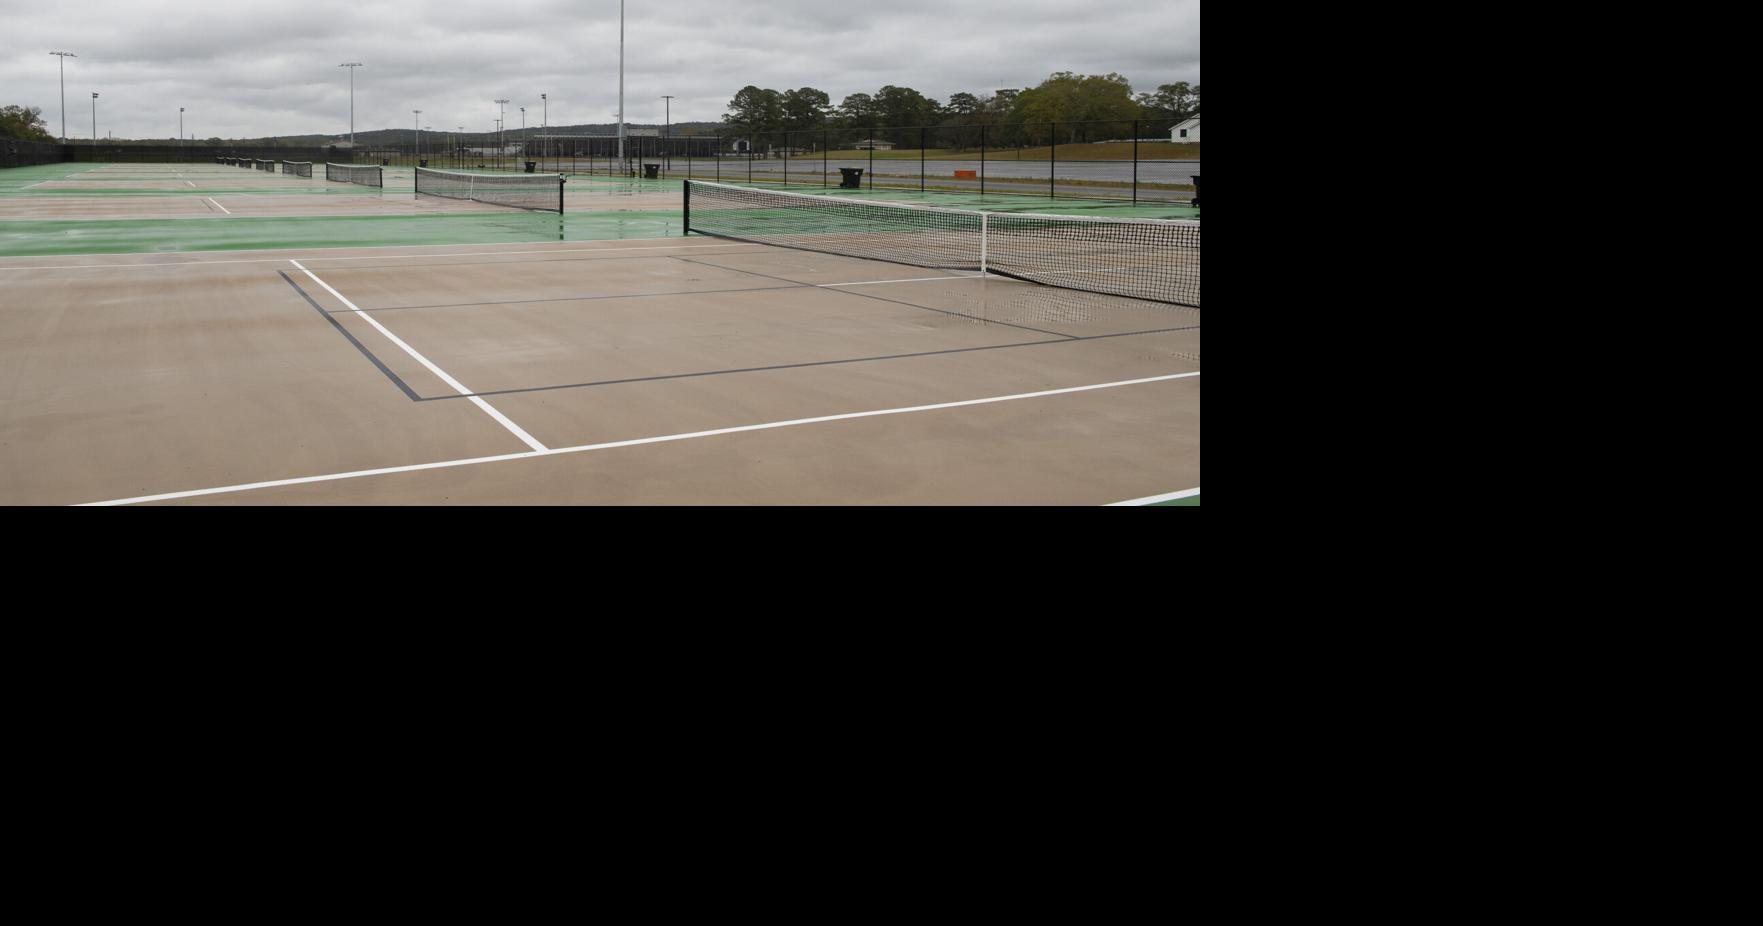 New tennis and pickleball courts open in Wetumpka News